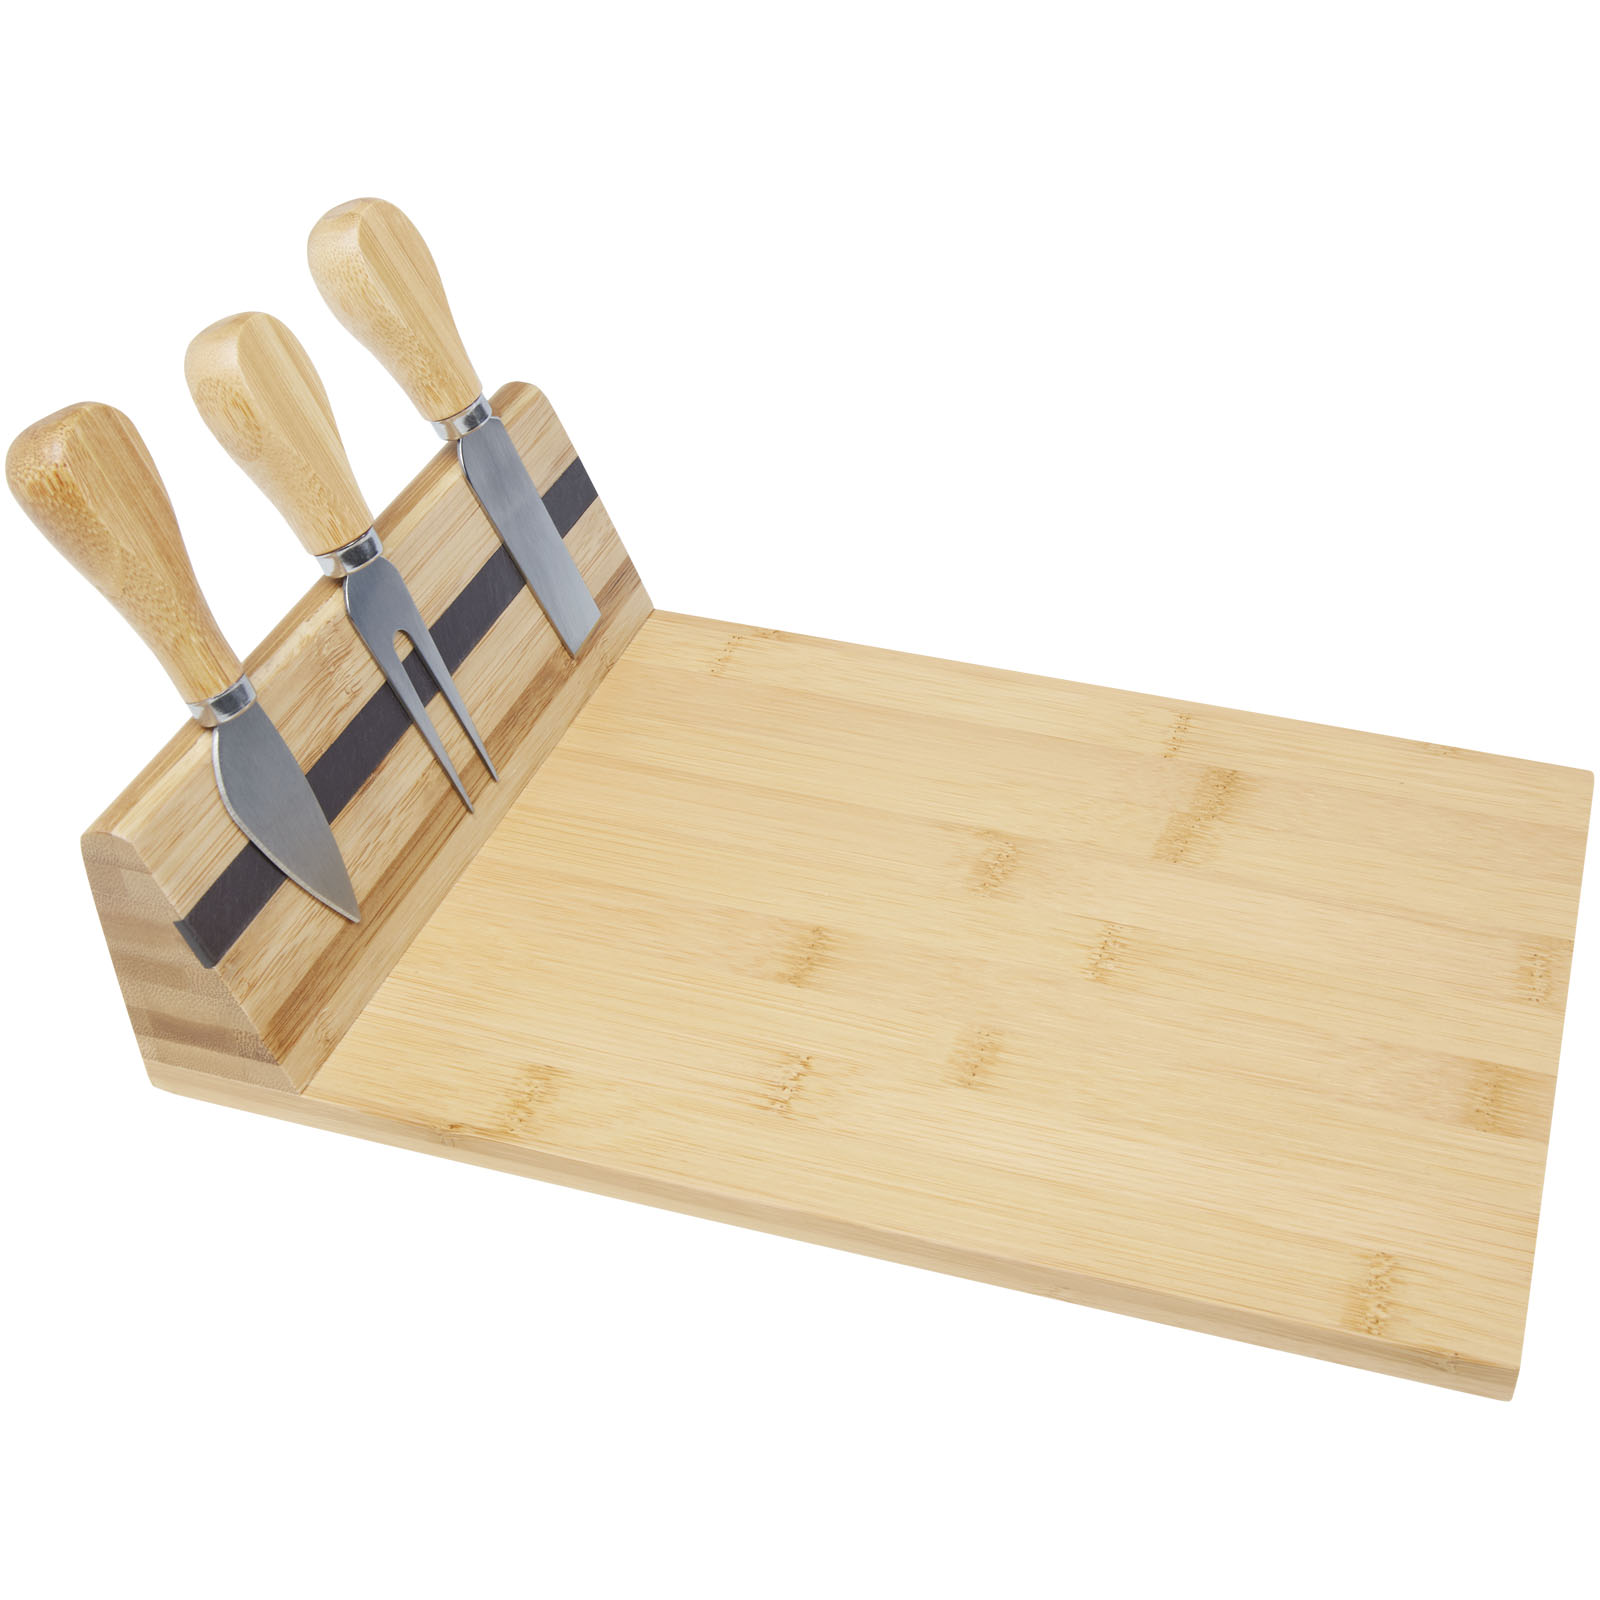 Bamboo cheese board QUANGO with magnet for attaching tools - natural